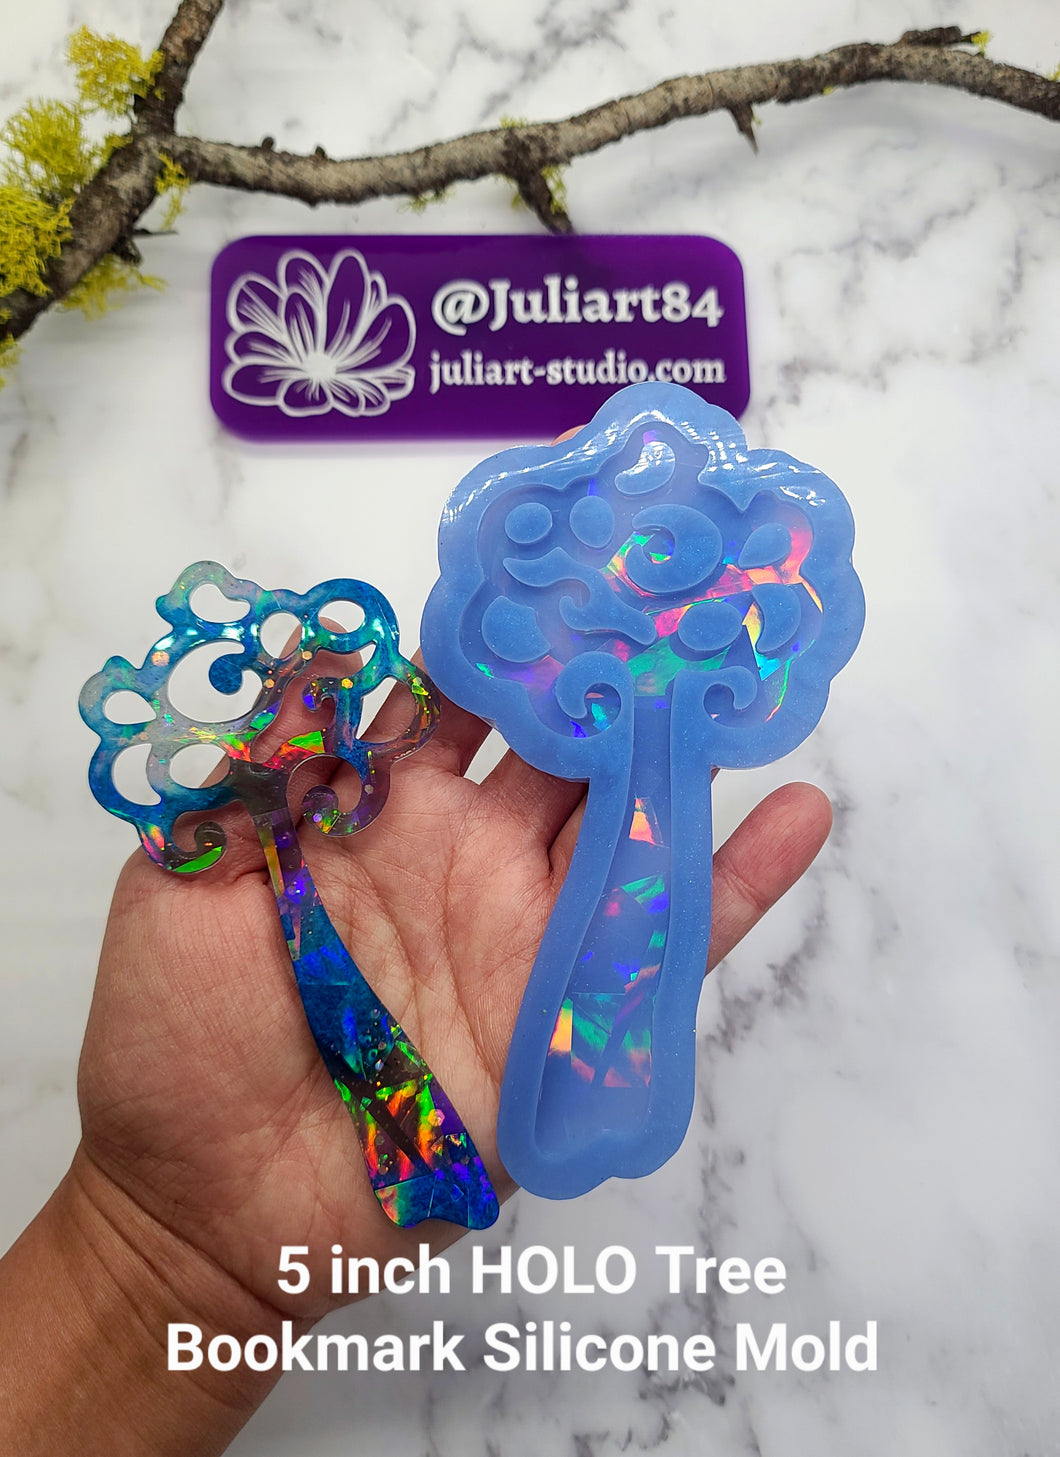 5 inch HOLO Tree Bookmark Silicone Mold for Resin